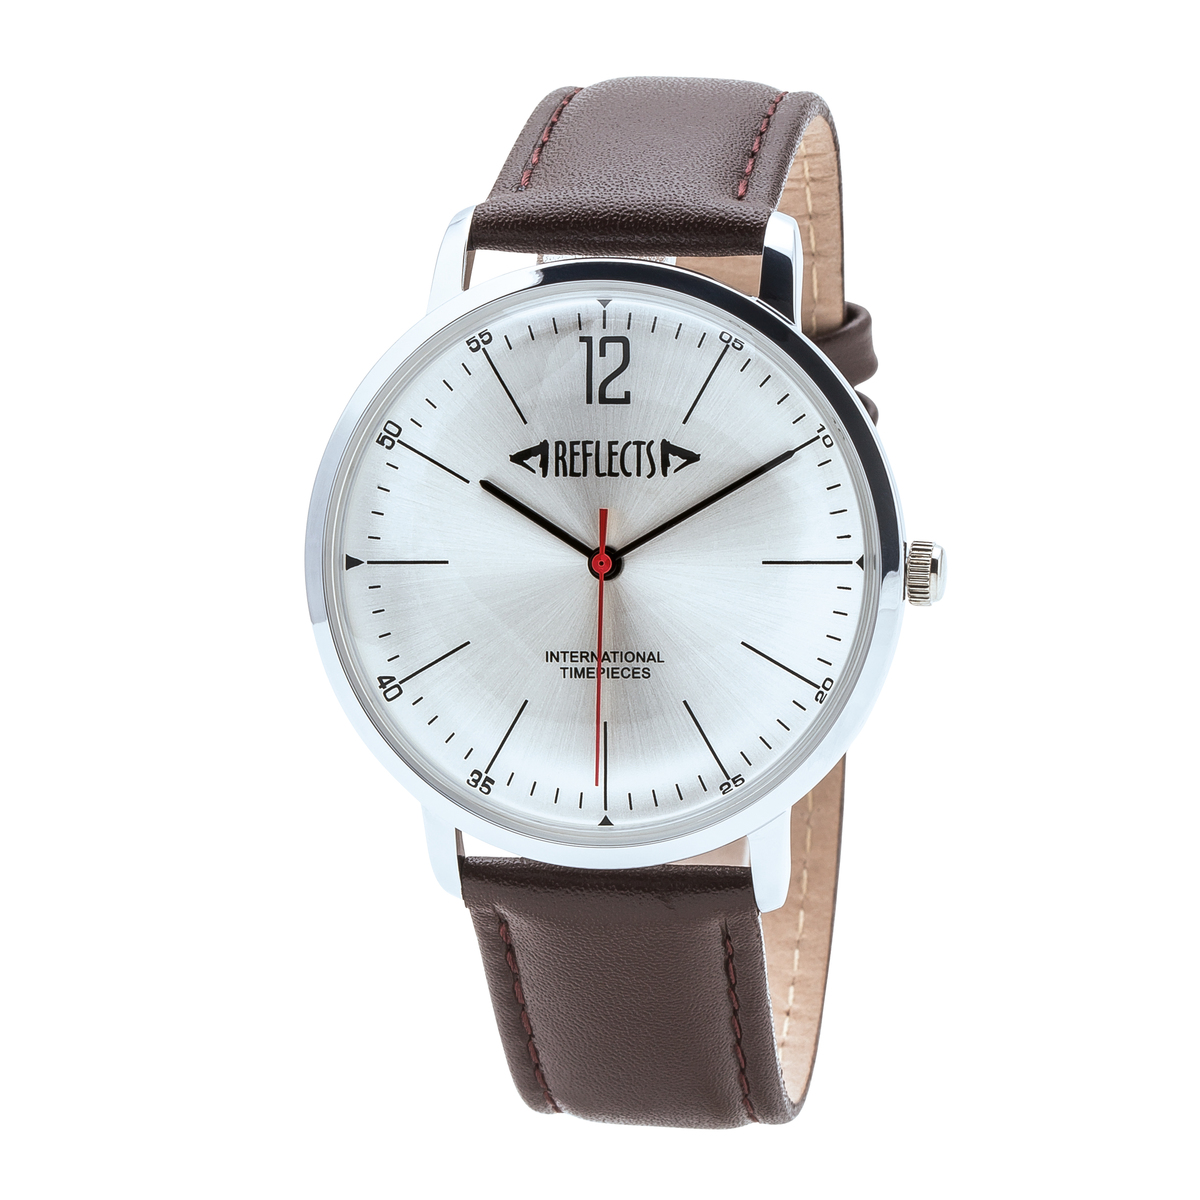 LM Armbanduhr REFLECTS-CLASSIC BROWN 